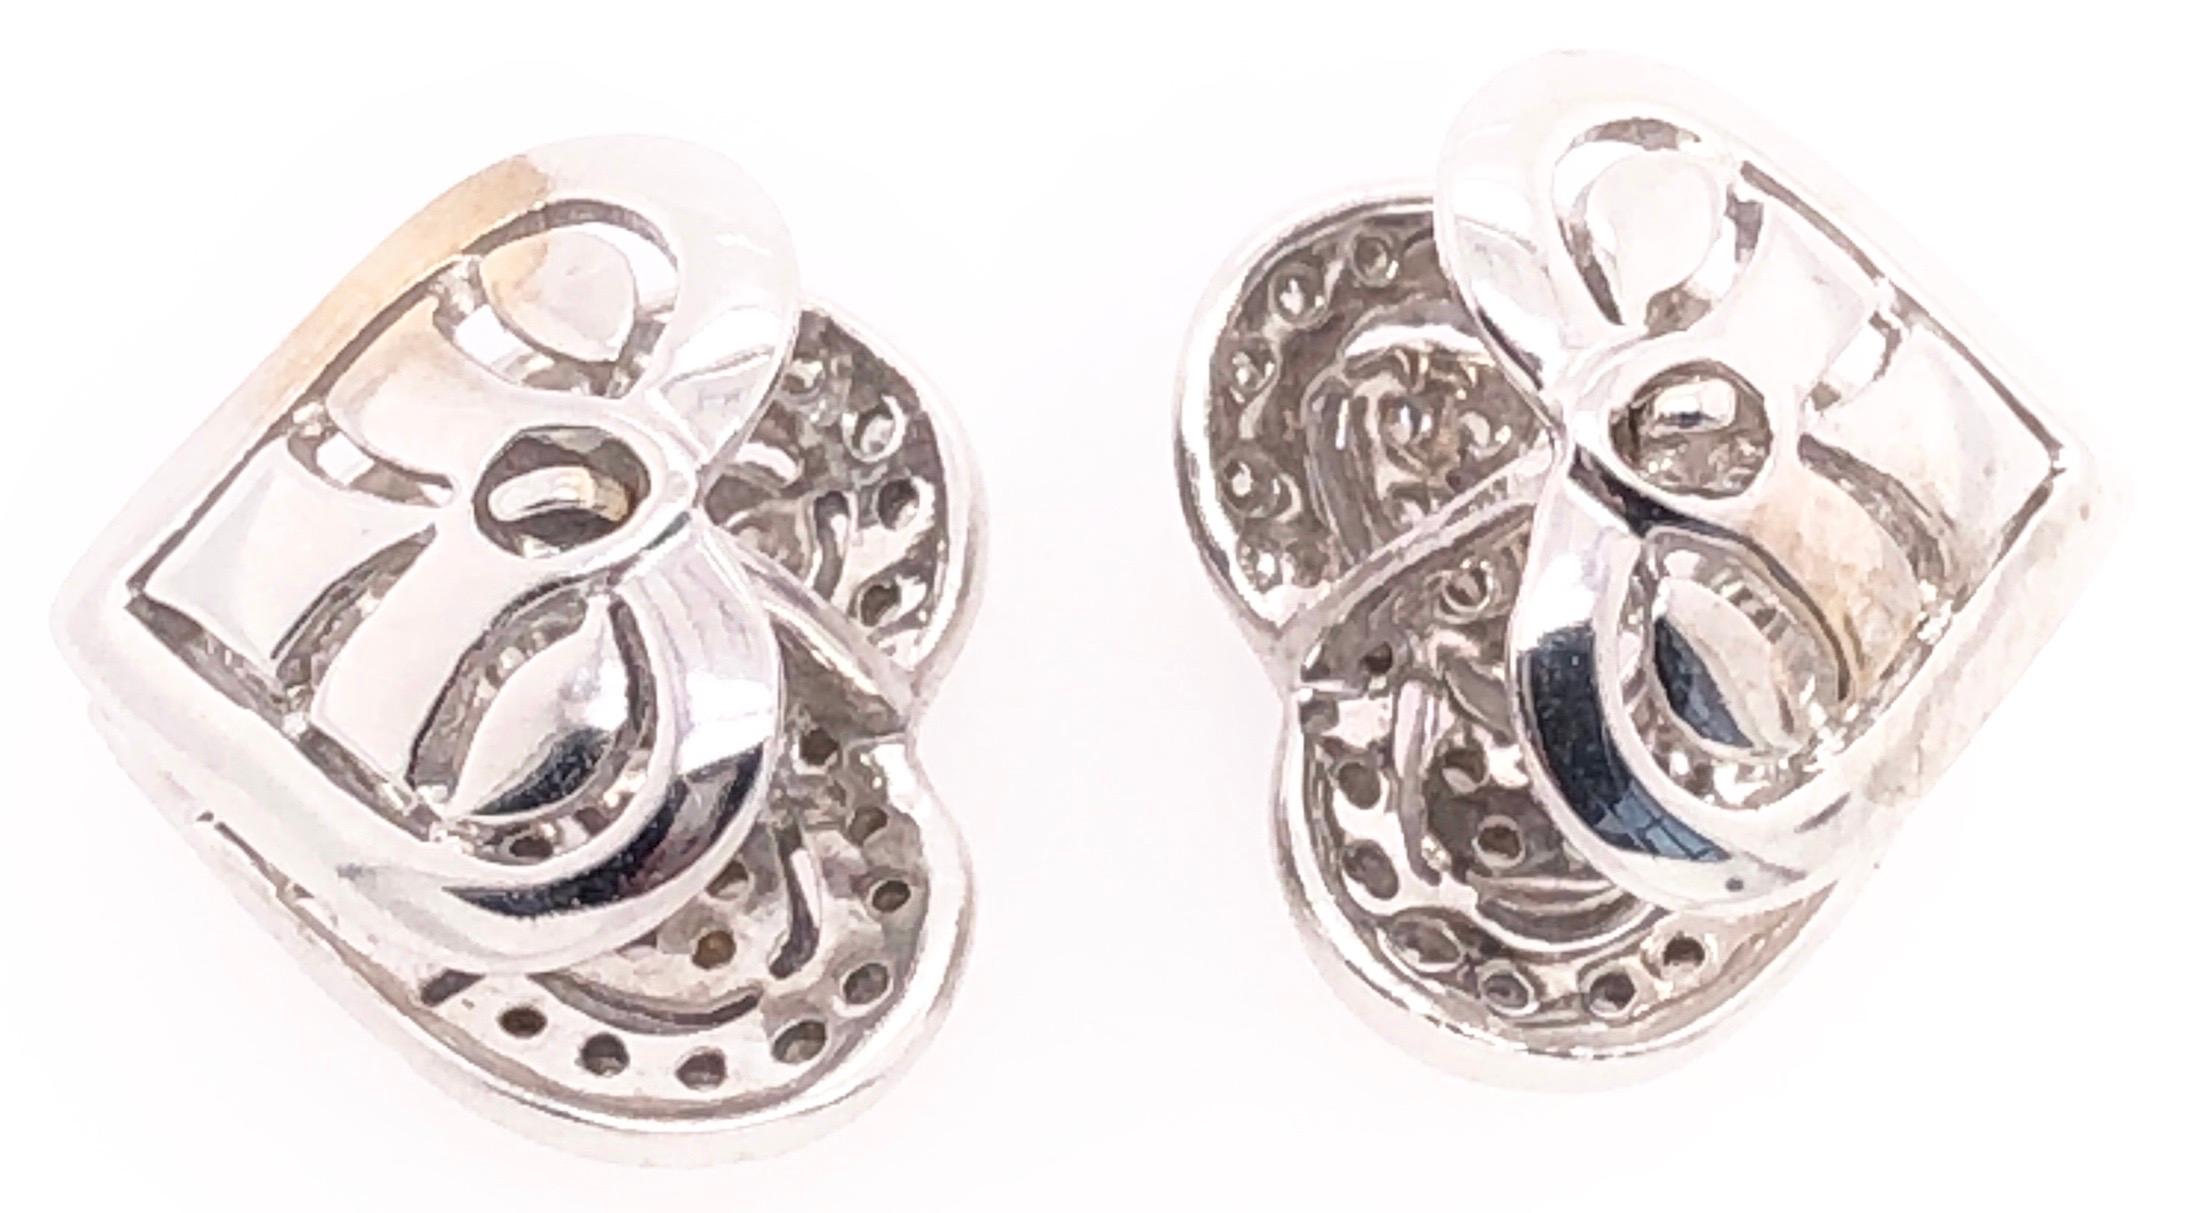 14 Karat White Gold Contemporary Heart Earrings with Diamonds.
0.50 Total Diamond Weight.
4.20 grams total weight.